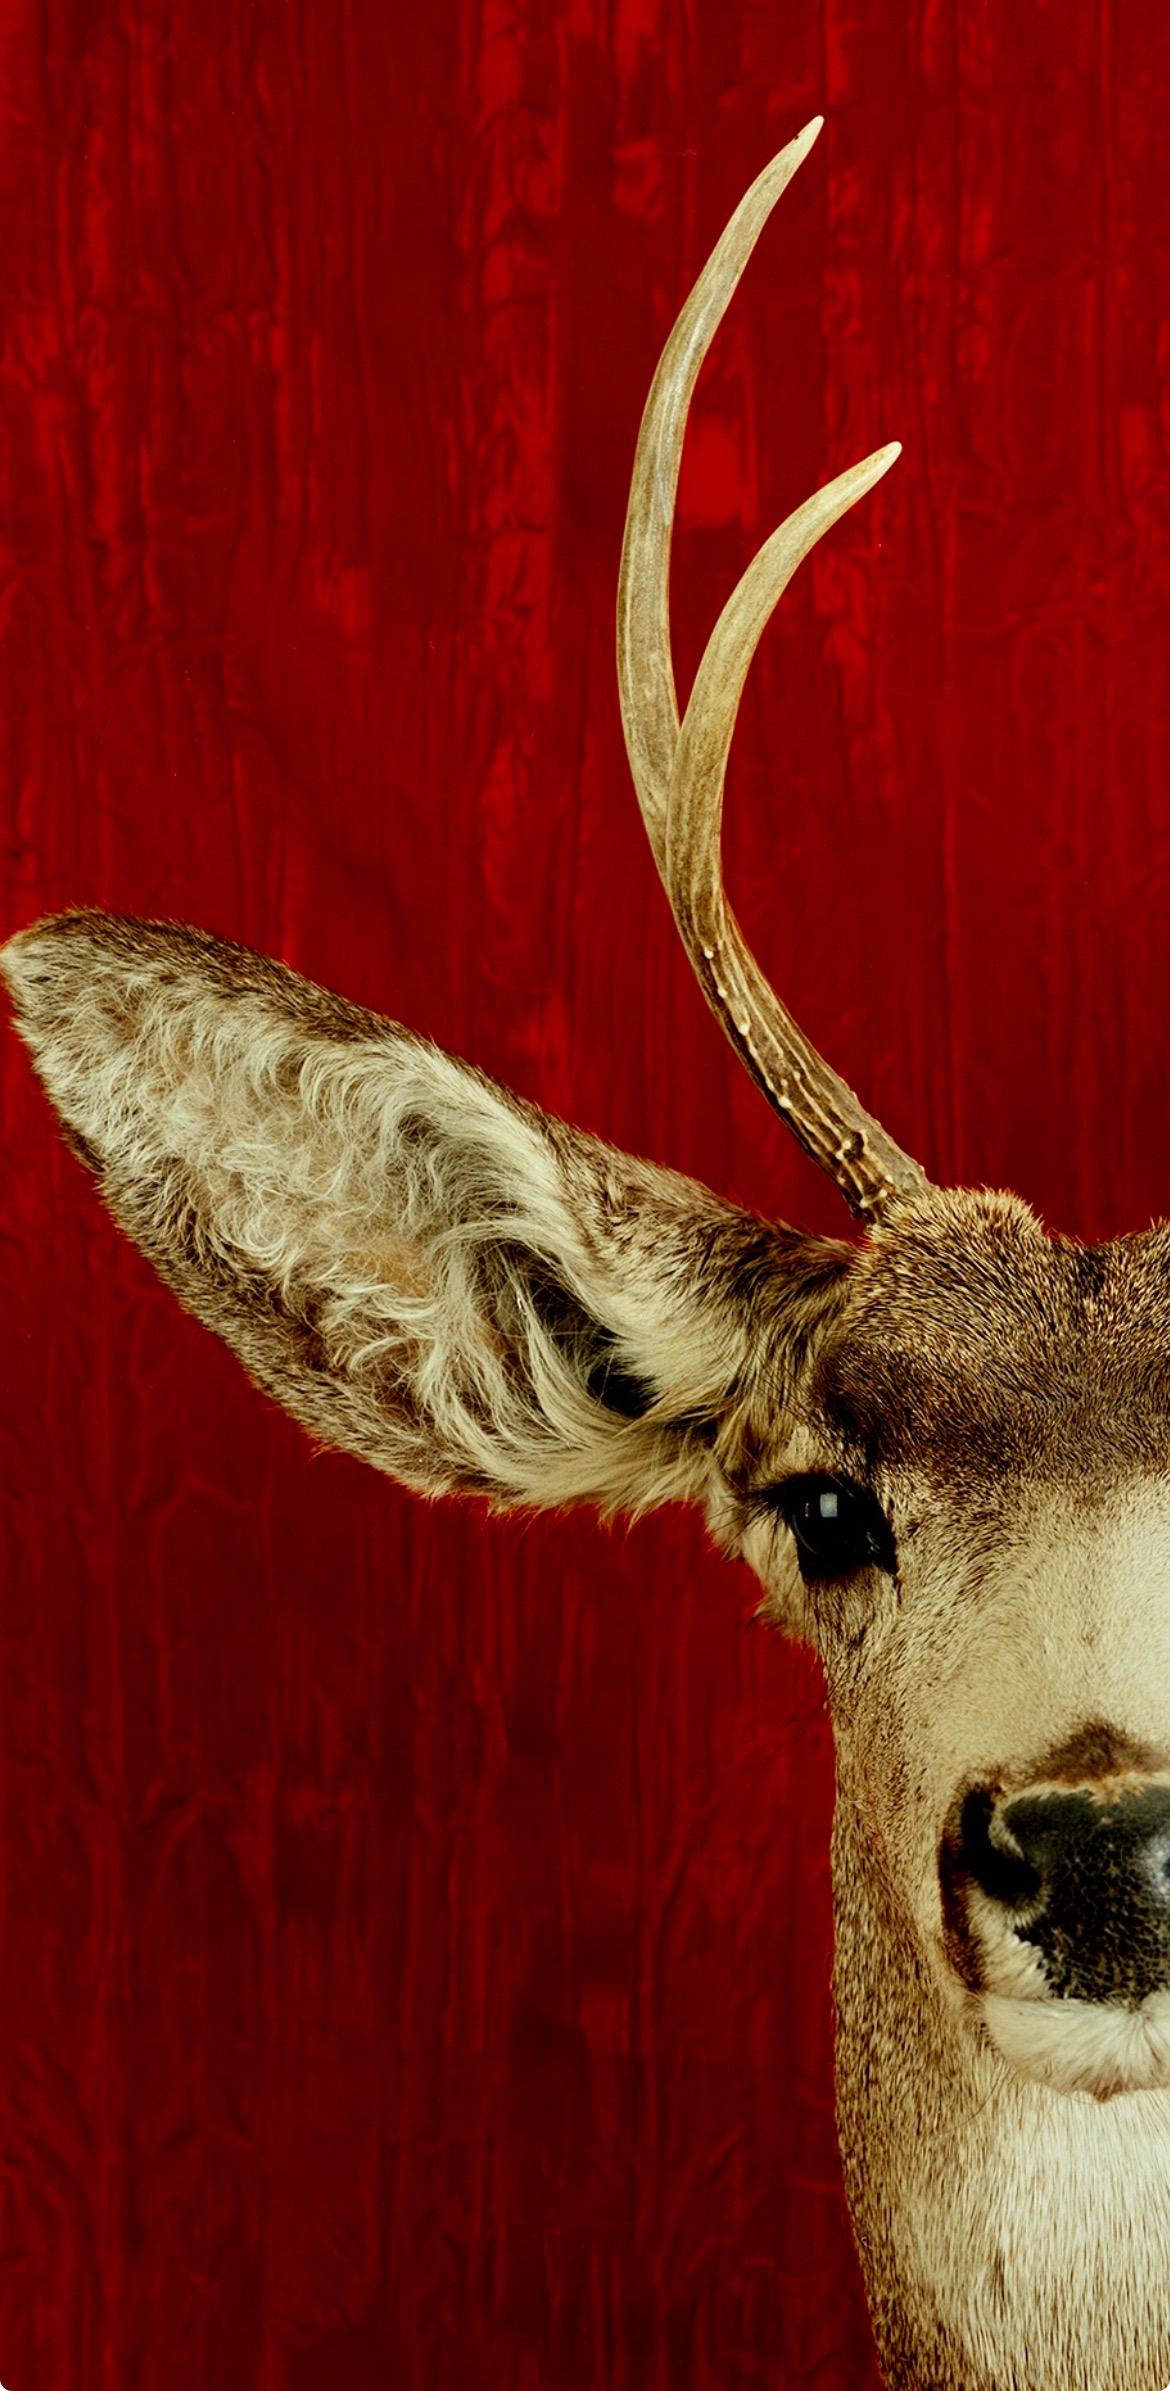 This hauntingly beautiful image by Santa Fe artist, Tasha Ostrander, was photographed against a background on red crushed velvet. The definition of its features is remarkable. It truly can fit any environment from rustic to starkly contemporary.